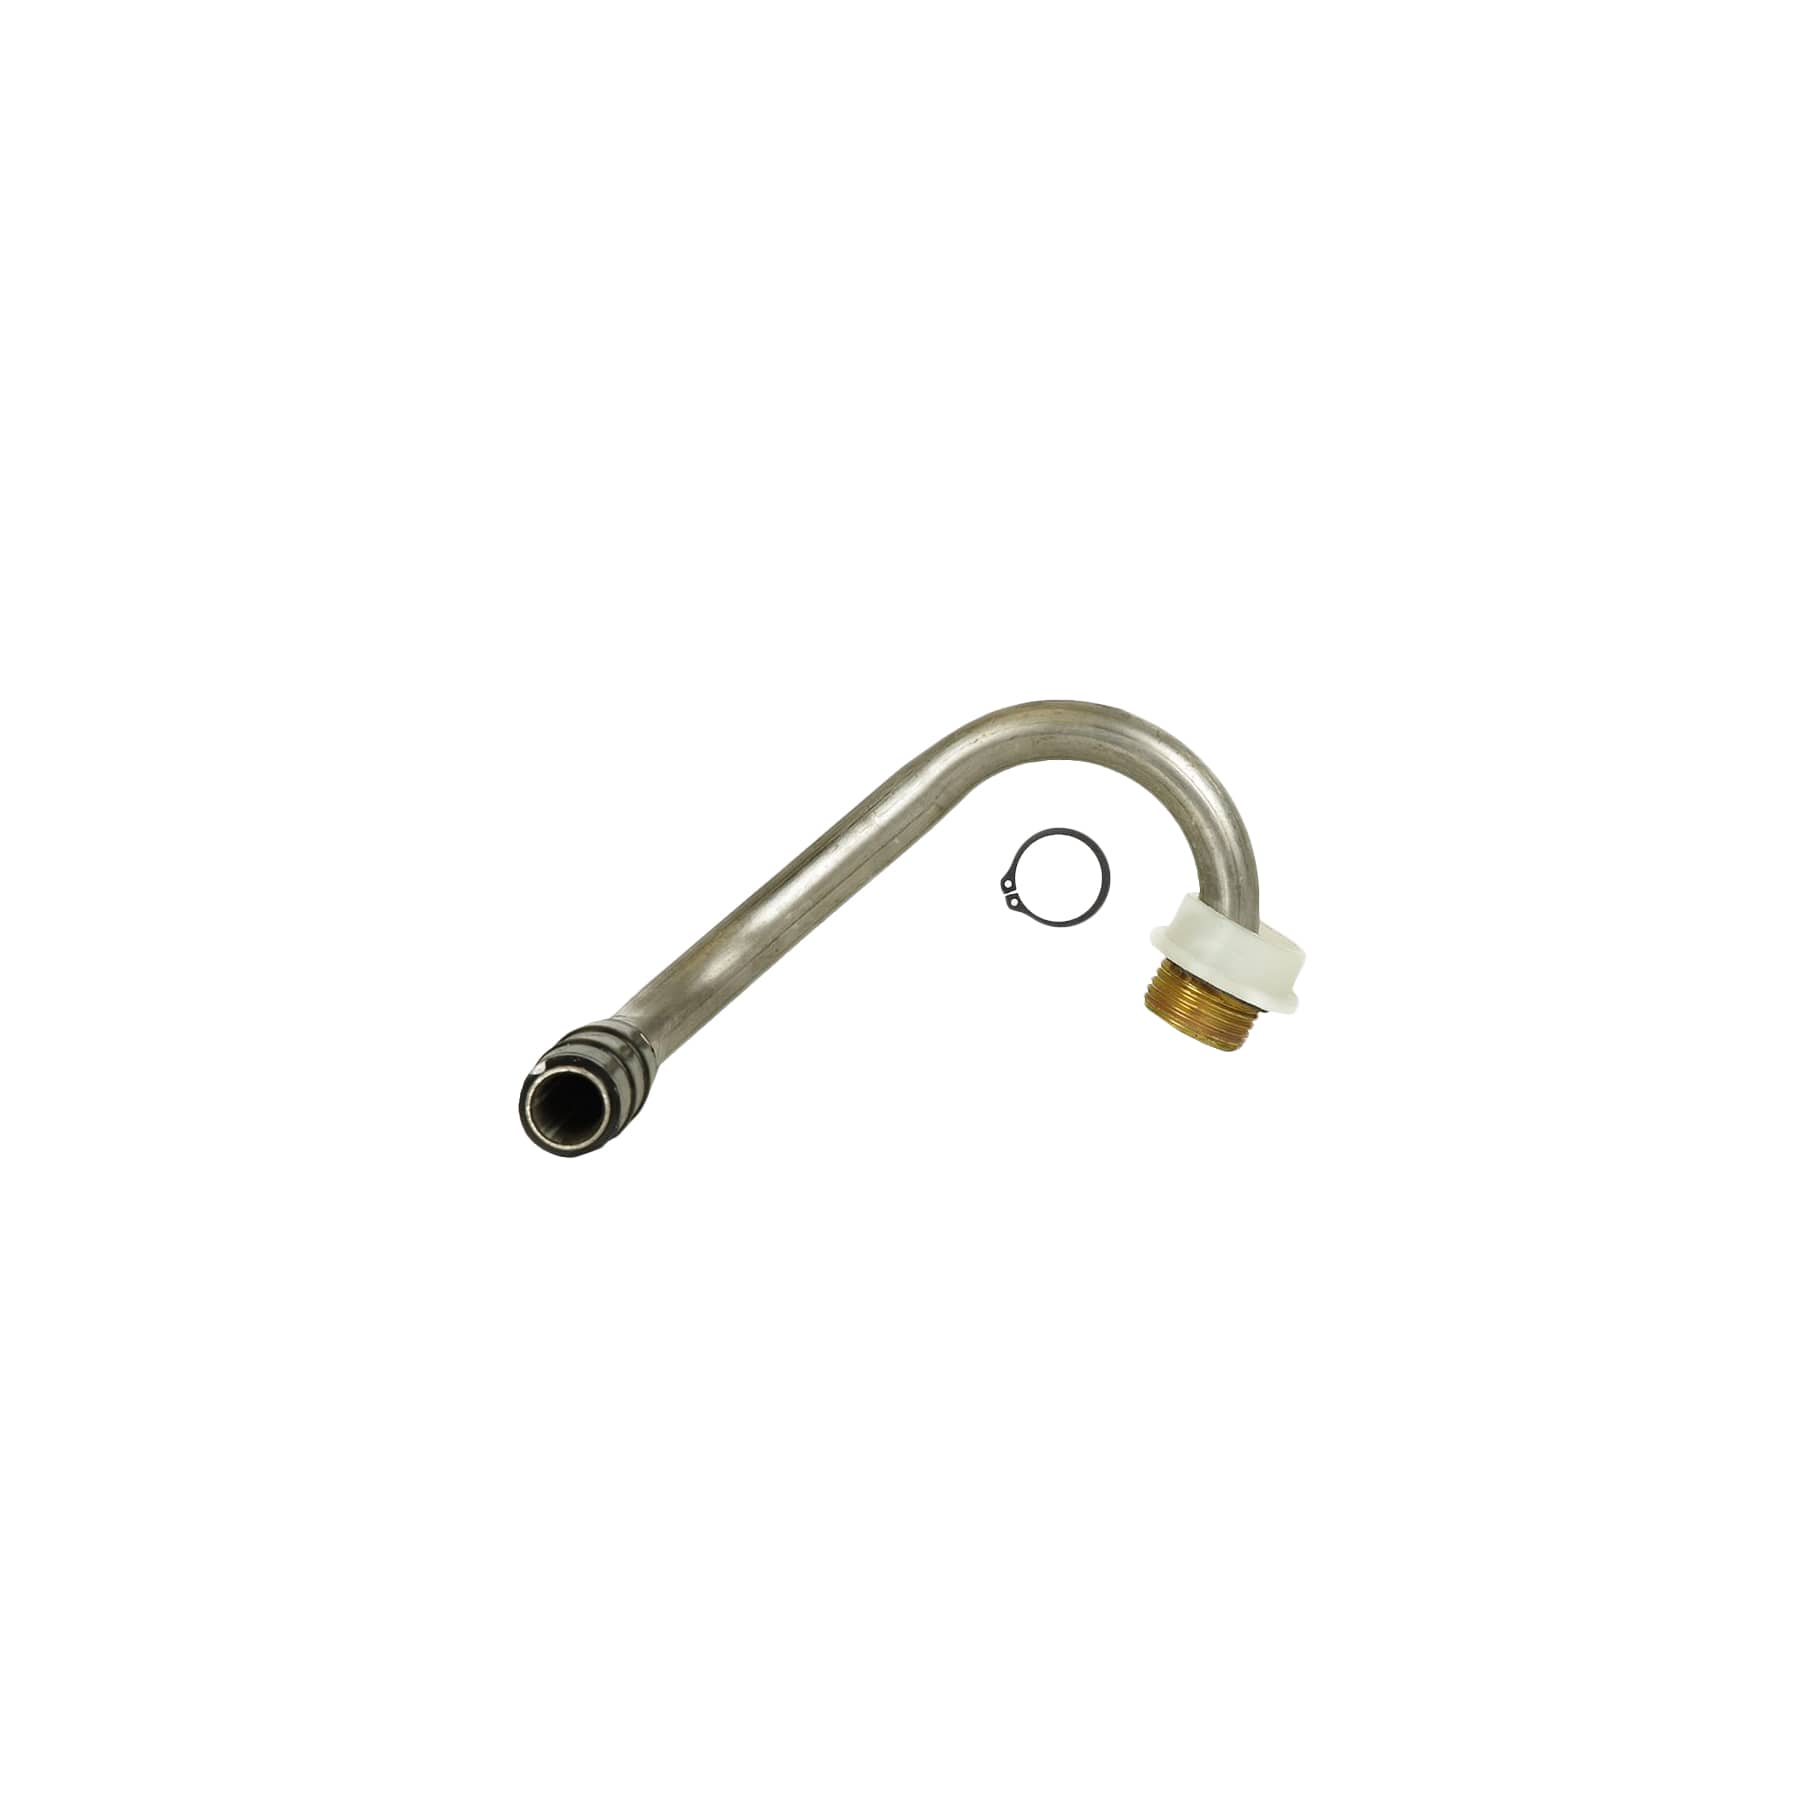 Replacement parts for Hose Reel Cart model 913012 – Backyard